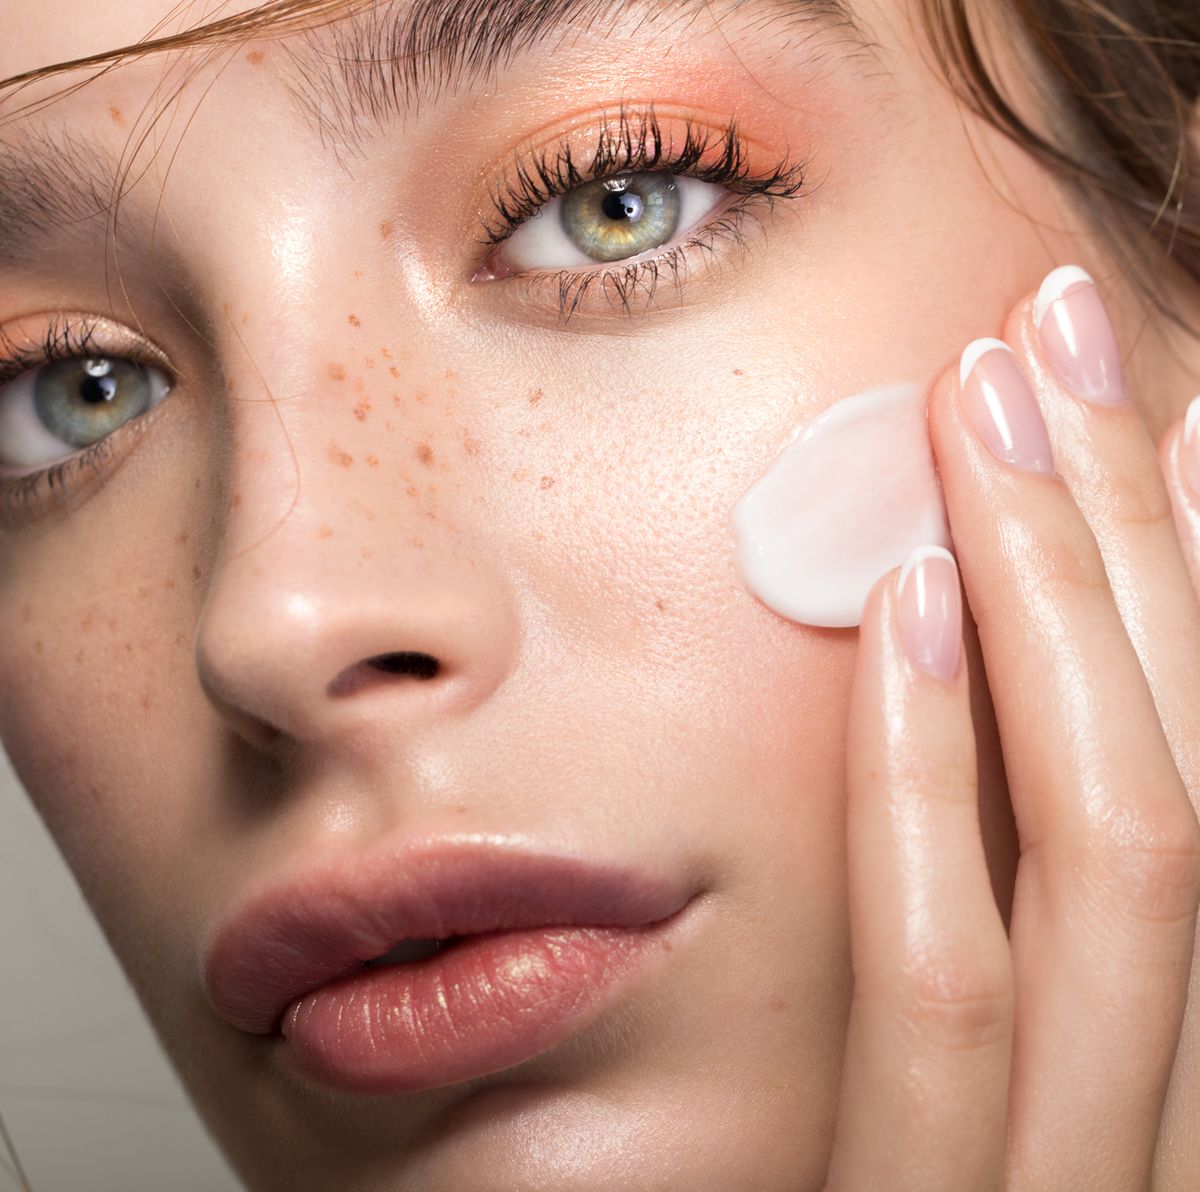 Get Rid of Redness on Face: 8 Causes & Treatments